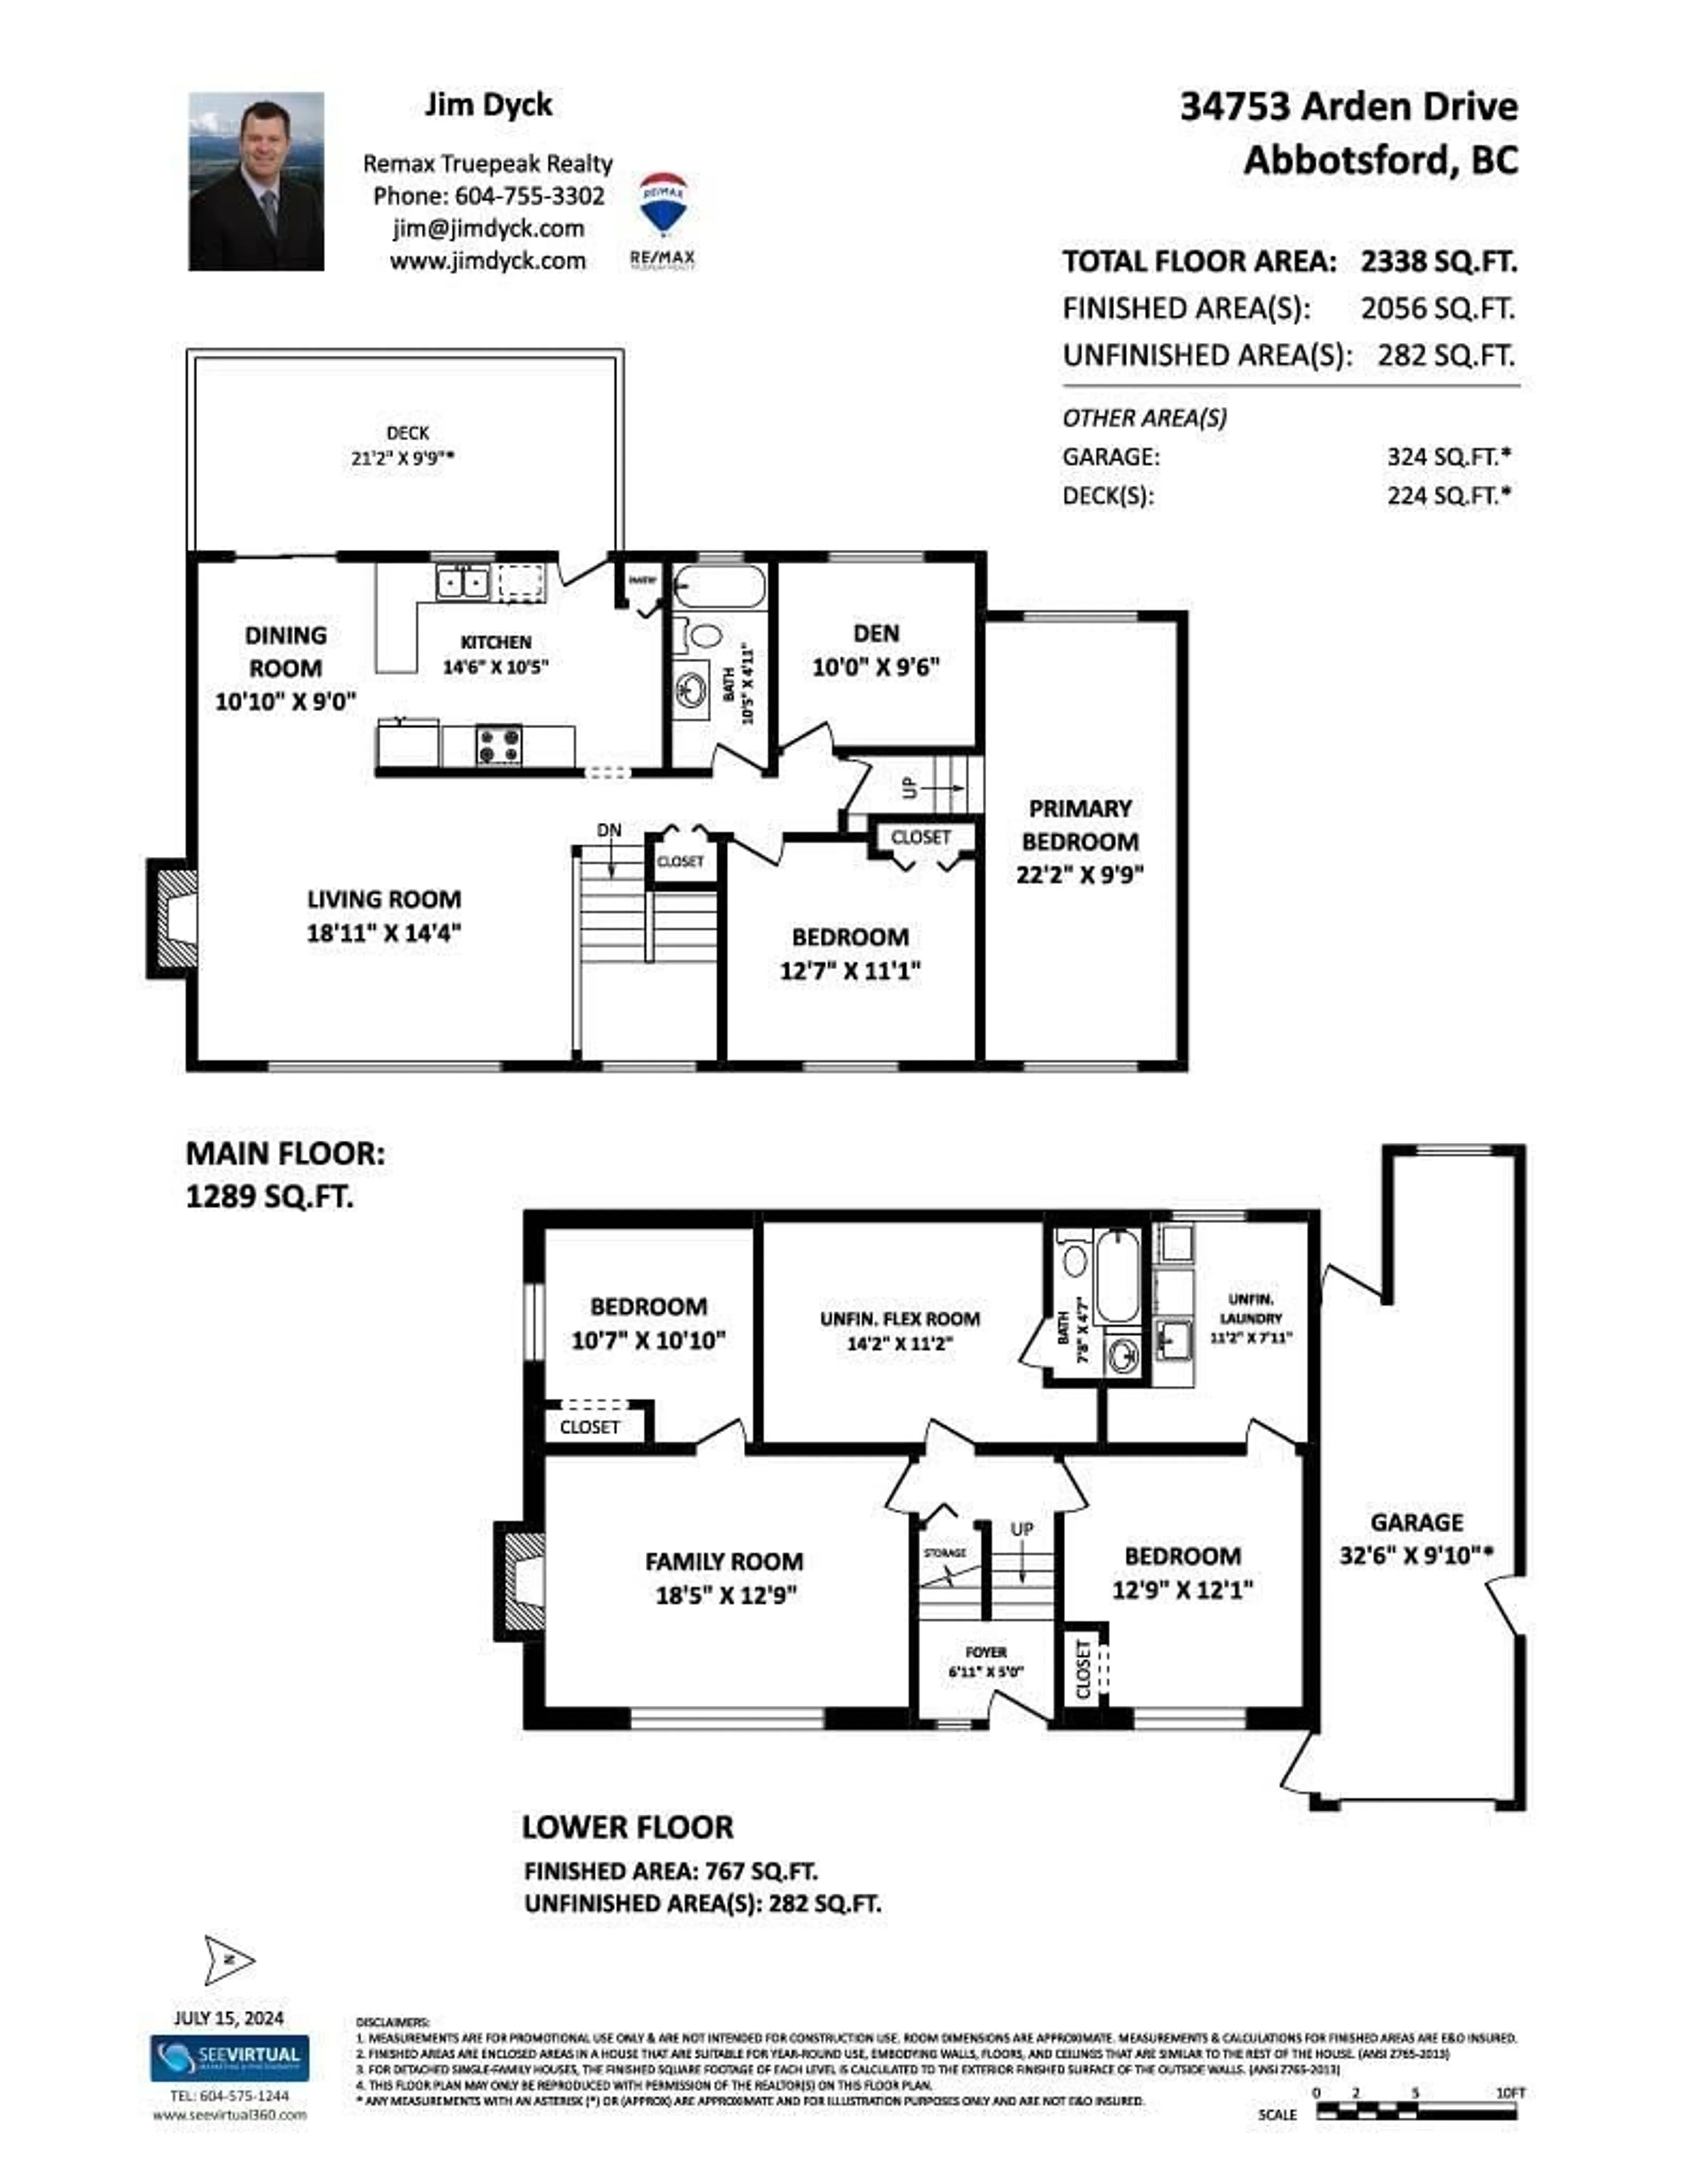 Floor plan for 34753 ARDEN DRIVE, Abbotsford British Columbia V2S2X9